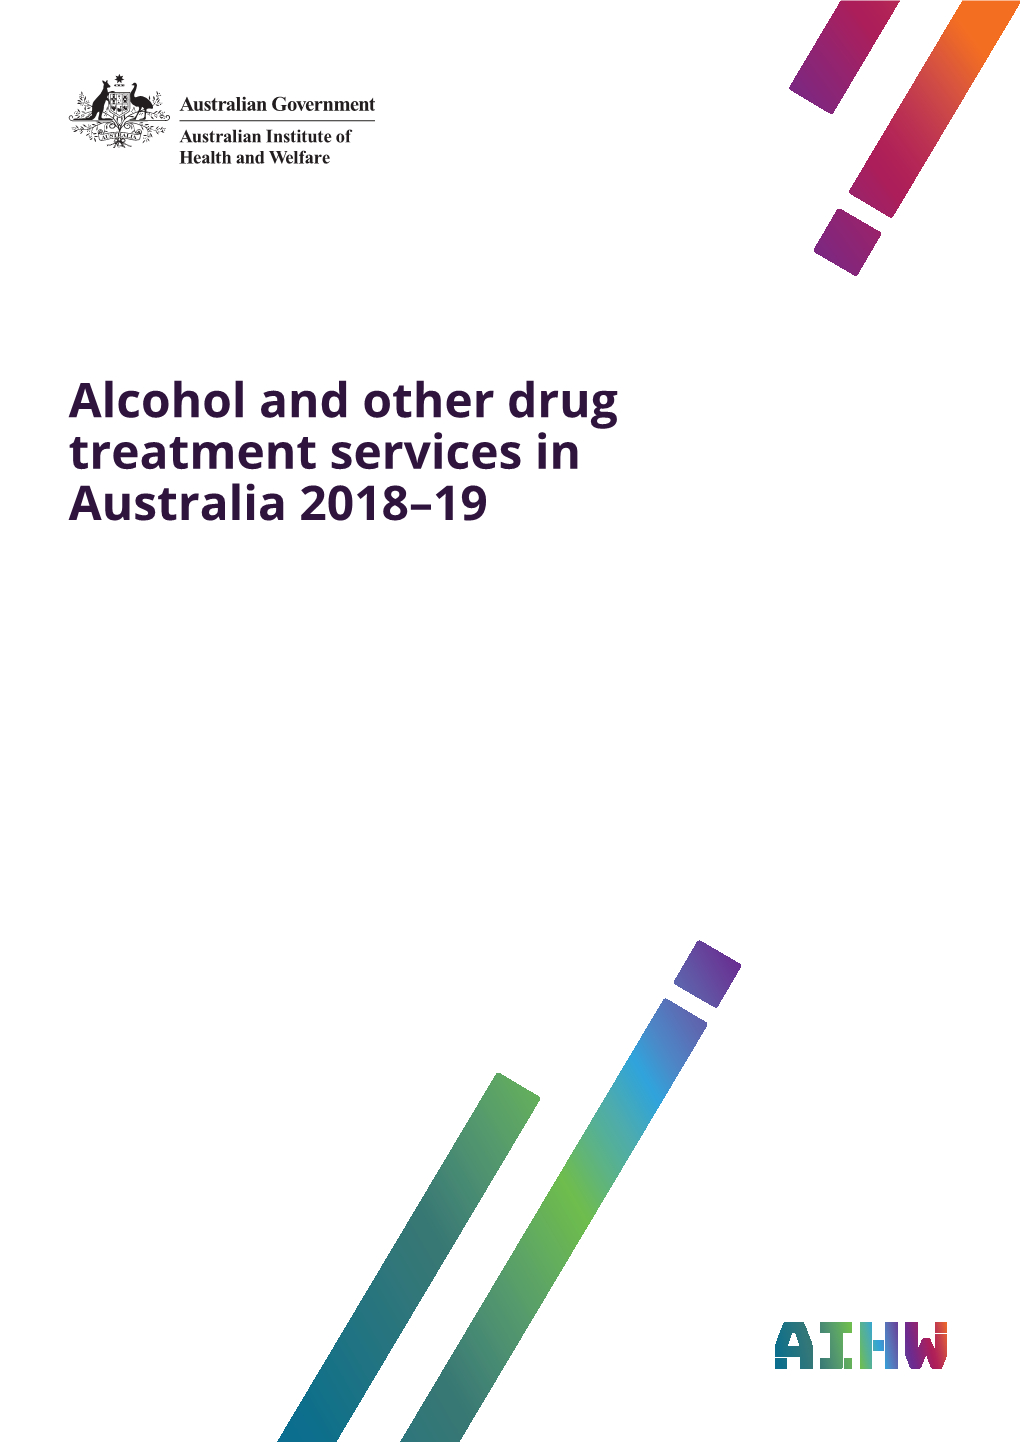 Alcohol and Other Drug Treatment Services in Australia: 2018-19